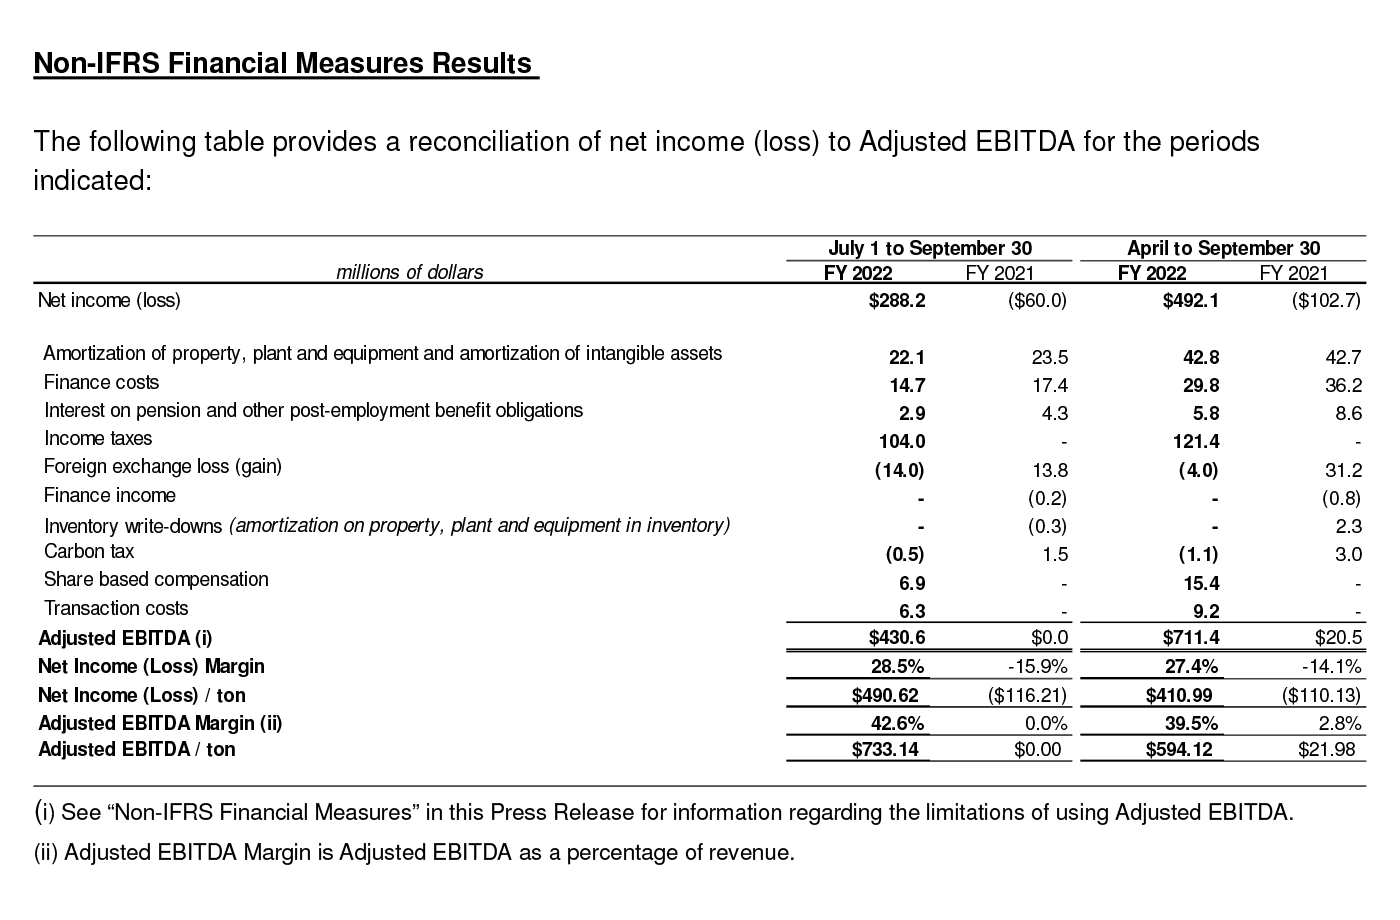 Non-IFRS Financial Measures Results